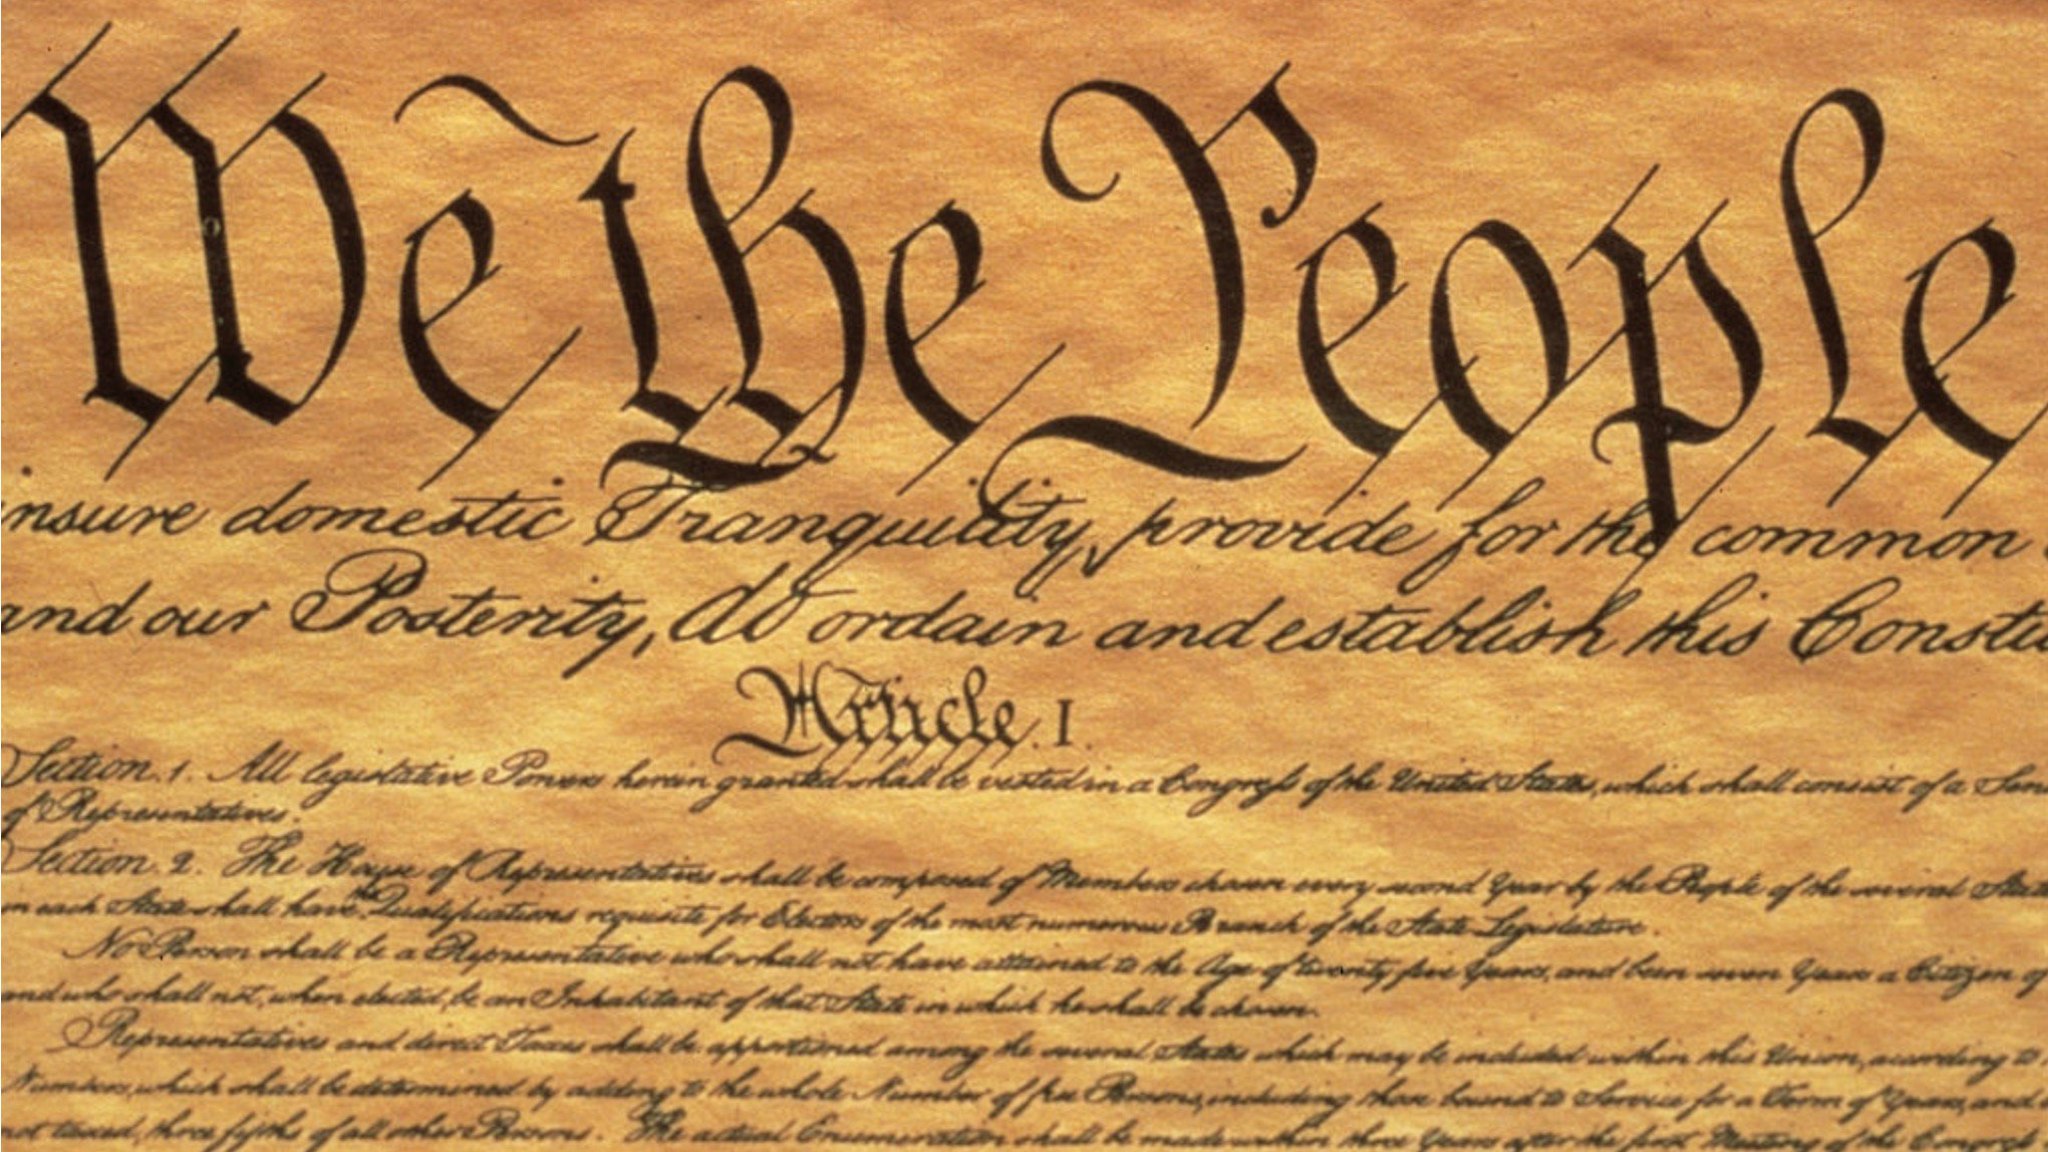 This is the Preamble to the US Constitution, It starts with the phrase We The People and shows only some of the writing from the upper left hand corner of the document of the Constitution, It is written on parchment paper that is now faded...